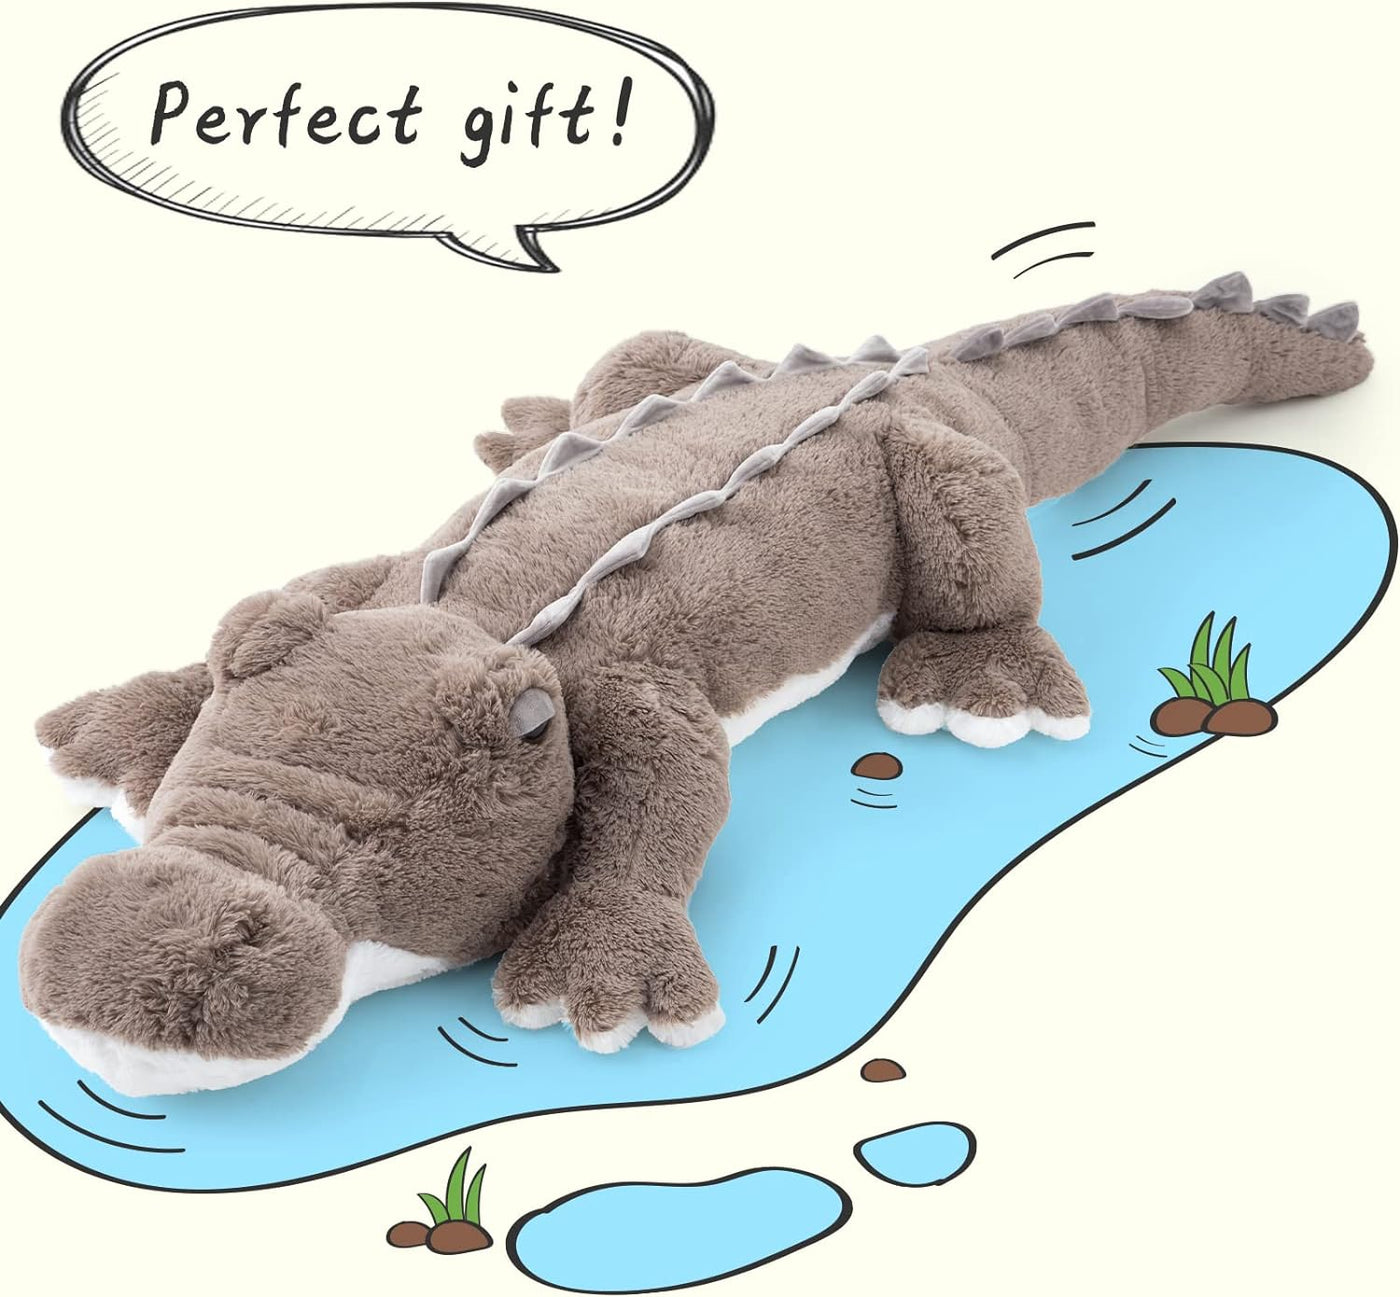 Giant Alligator Stuffed Toy, 67 Inches